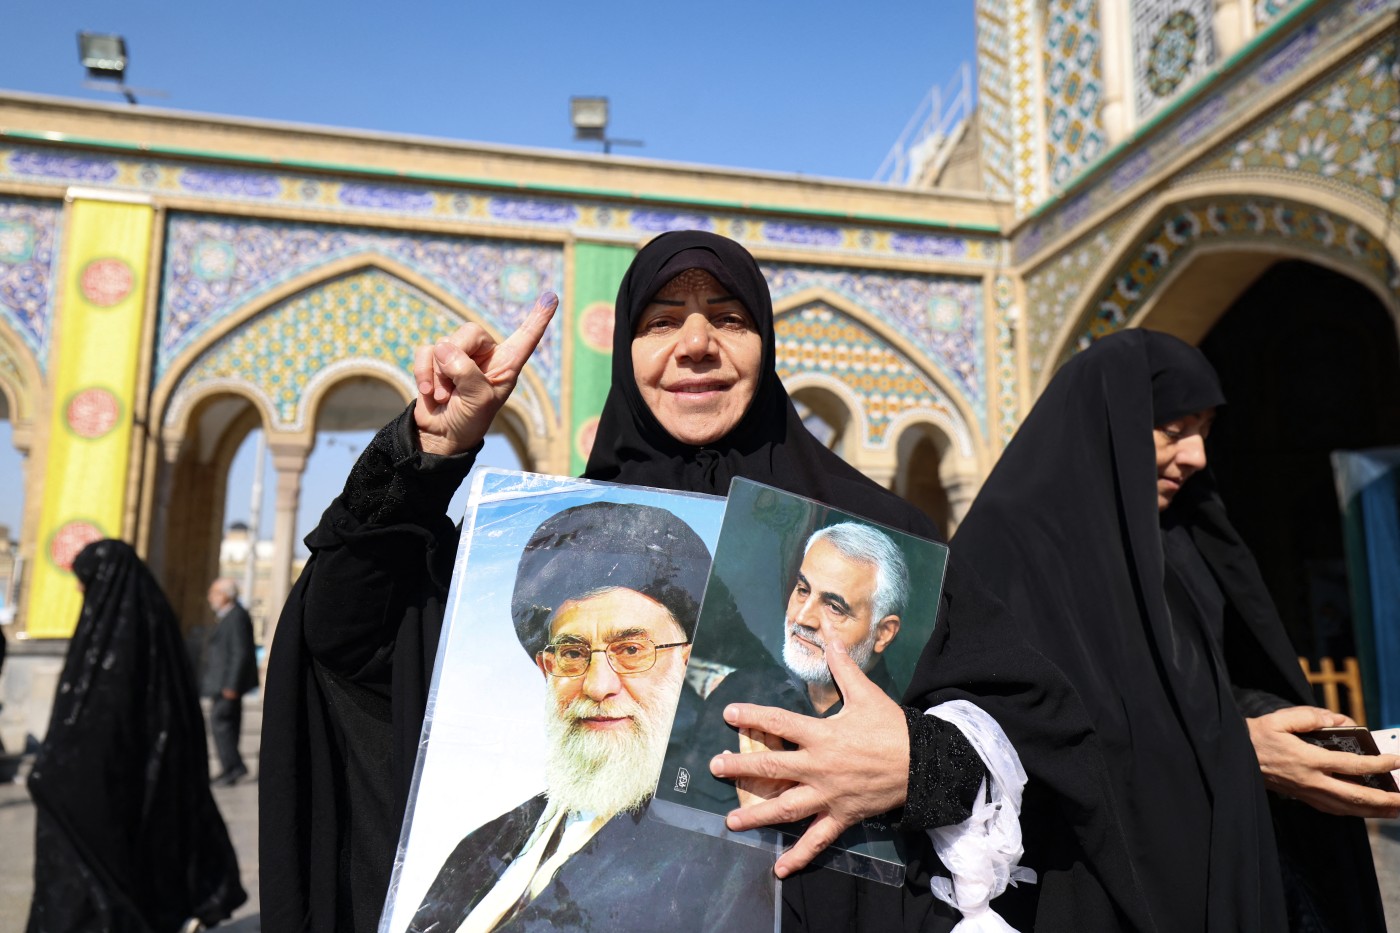 Polls open in Iran elections as conservatives expected to dominate